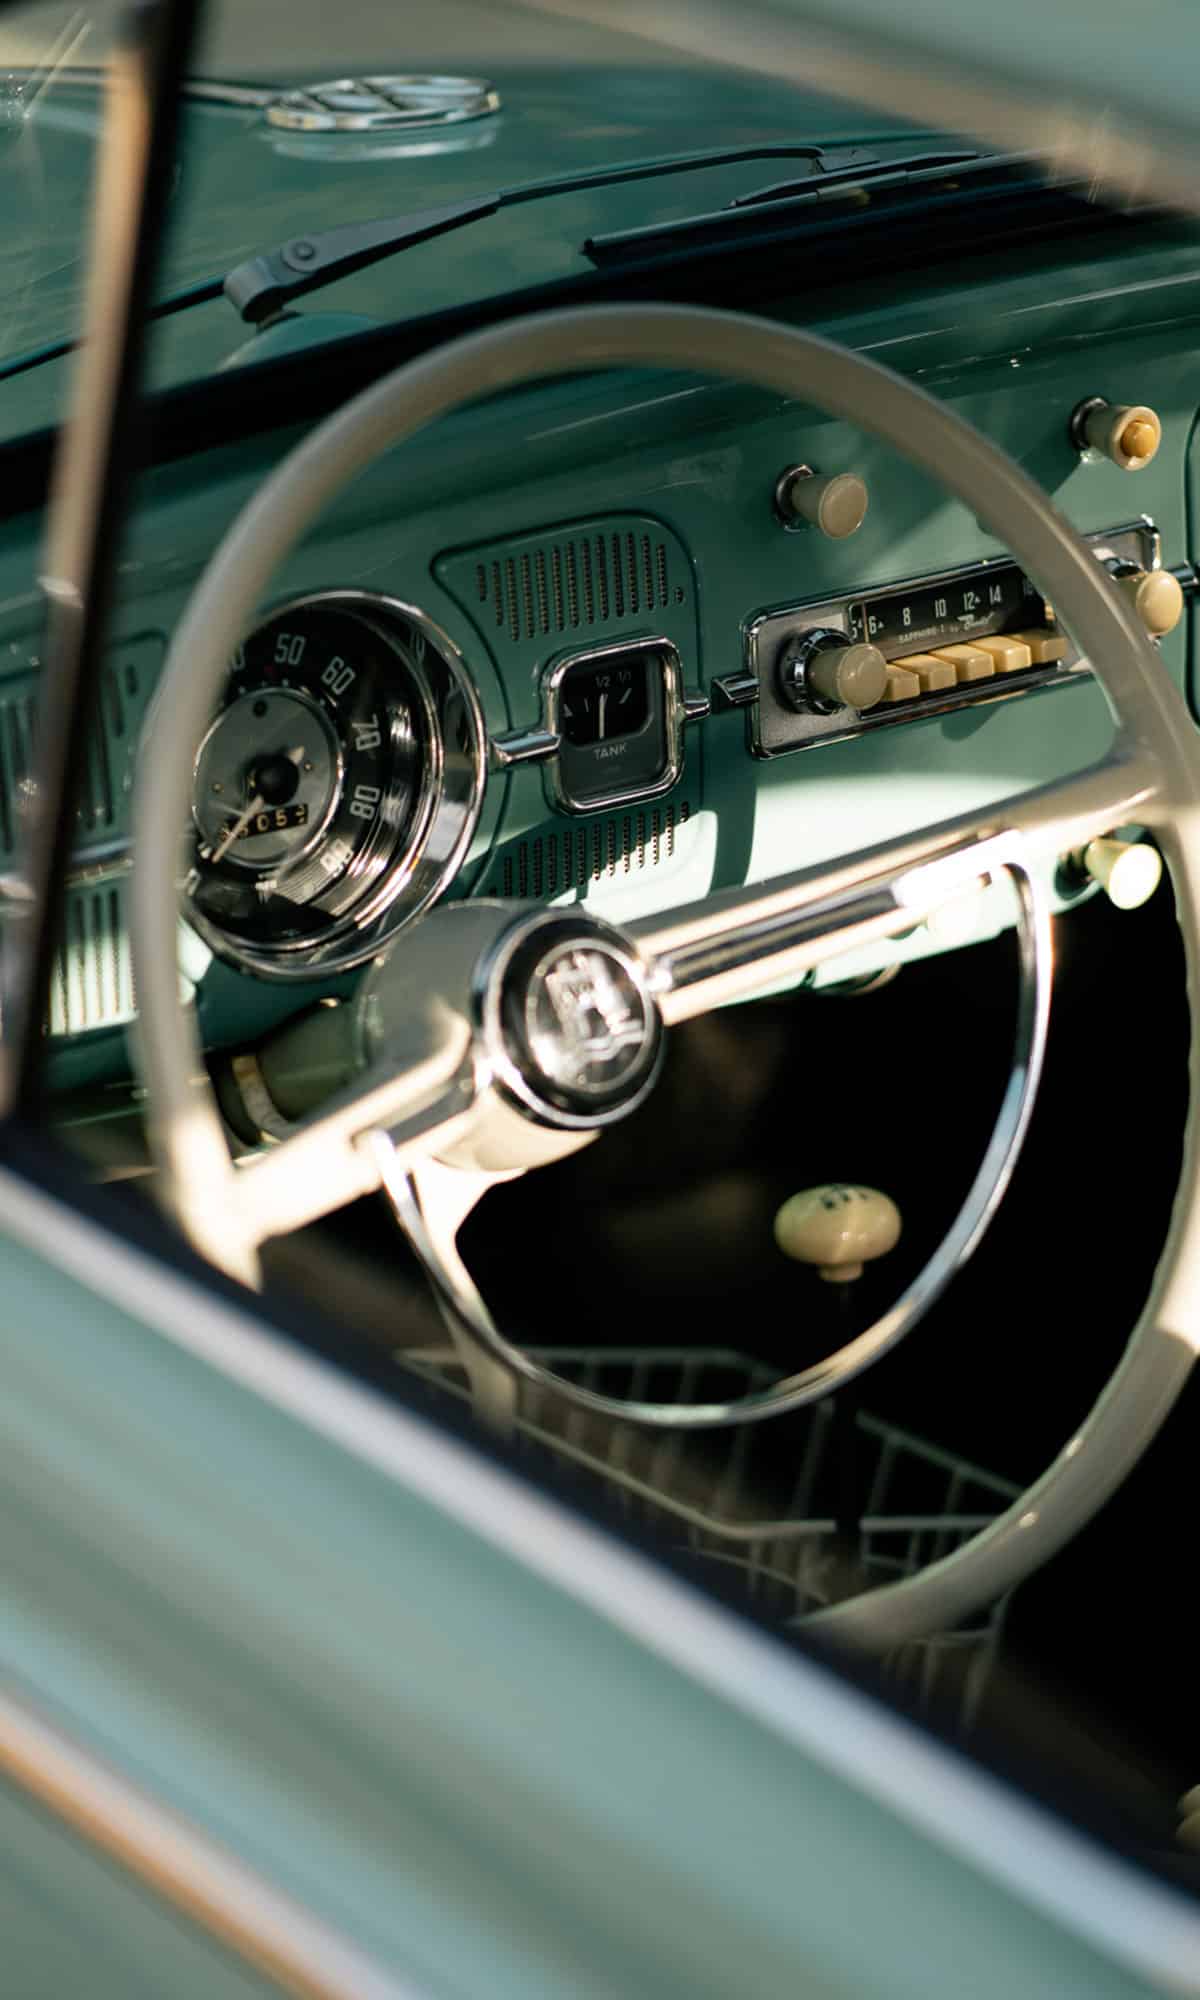 The wheel and dashboard of a well restored, turquoise Volkswagen Beetle from the 1960's.